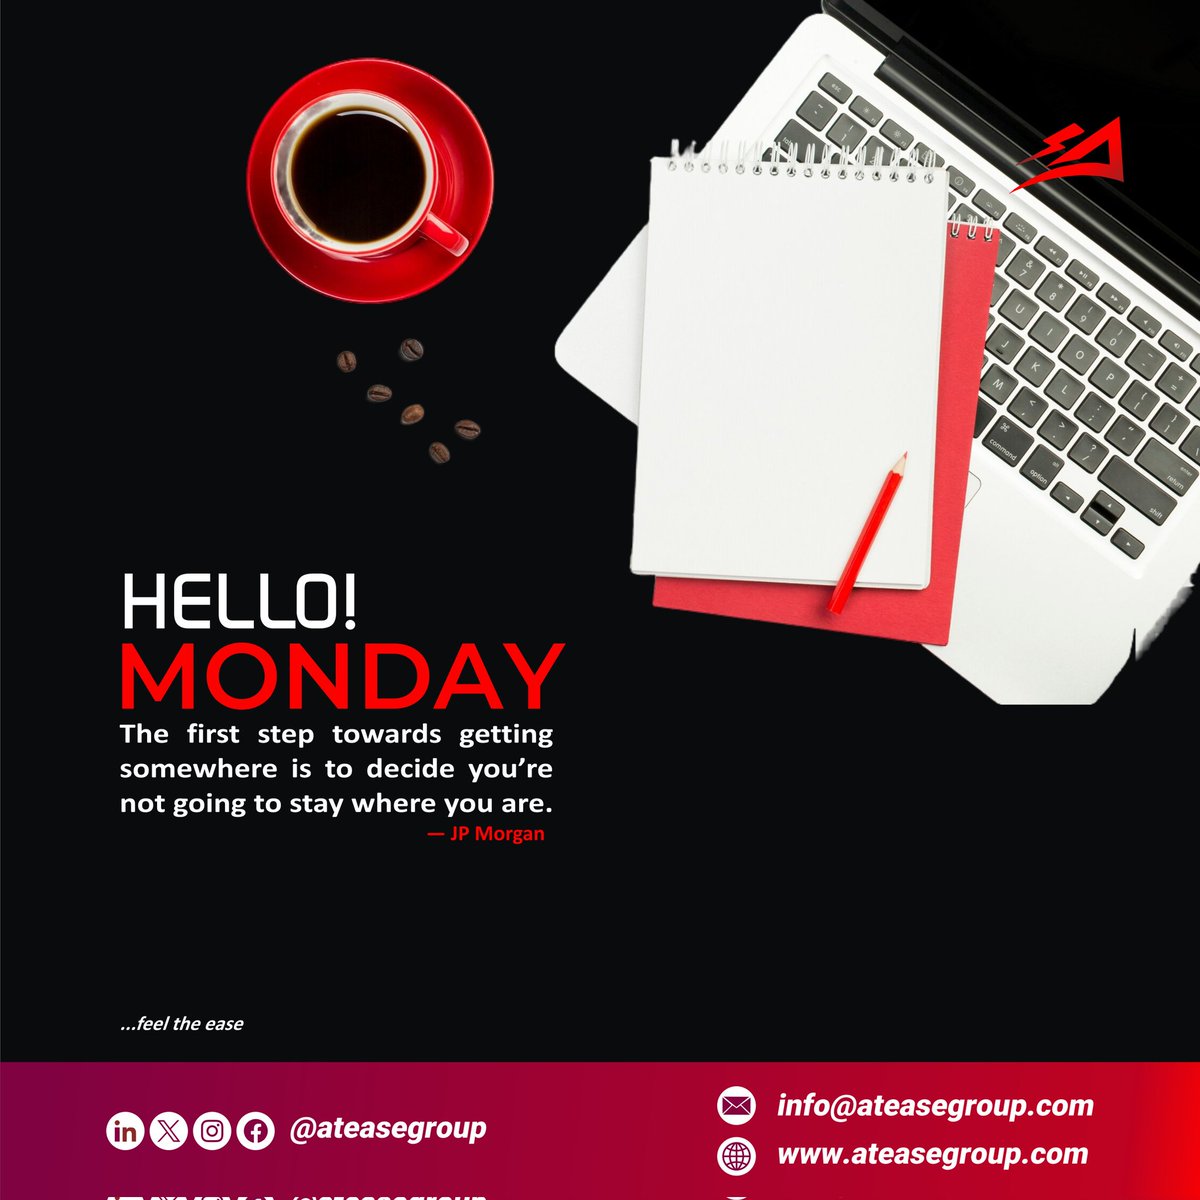 It's a New Week, Make a Move... 
The first step towards getting somewhere in life is to decide you're not going to stay where you are.

#ateasegroup
#atease
#hellomonday